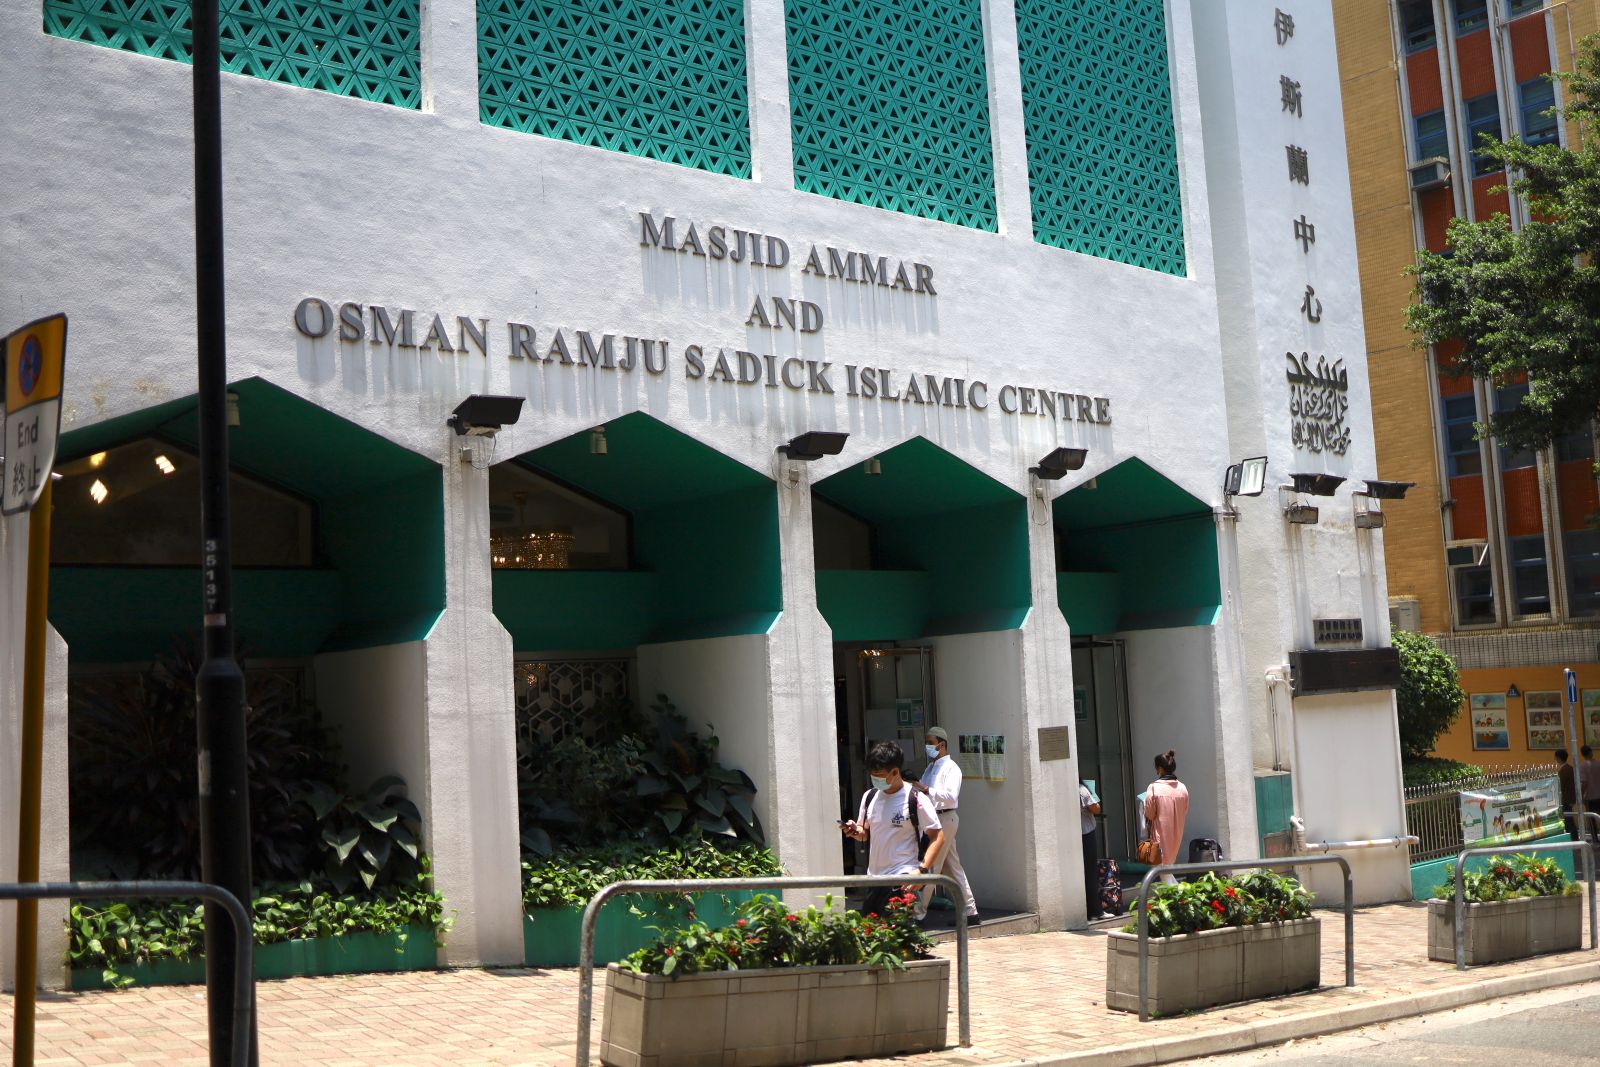 The entrance of the Islamic Centre